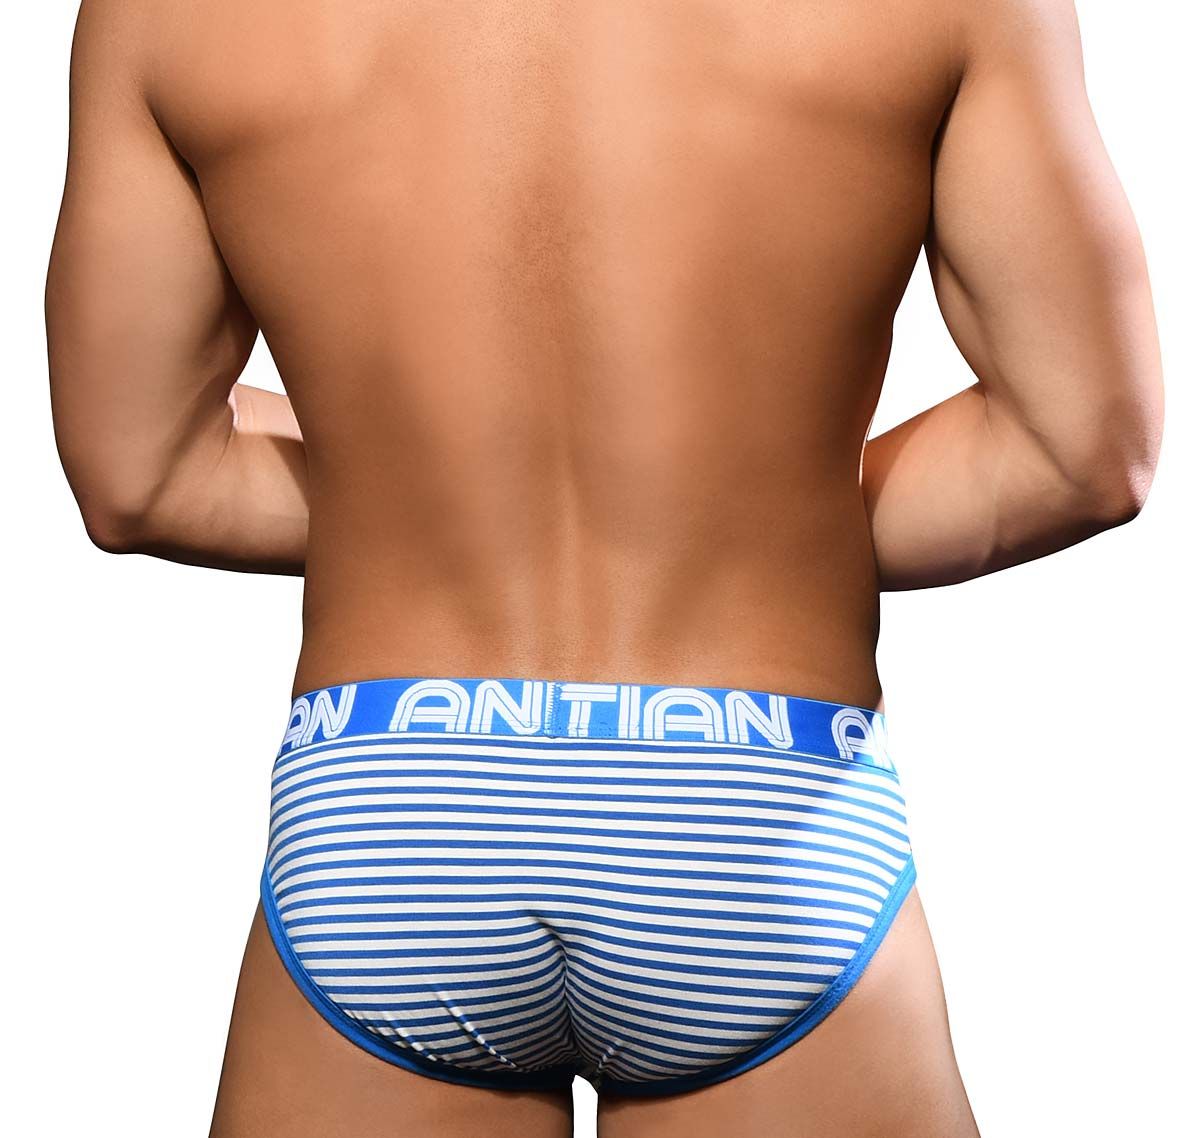 Andrew Christian Brief FLY BRIEF w/ ALMOST NAKED 92738, blue/white